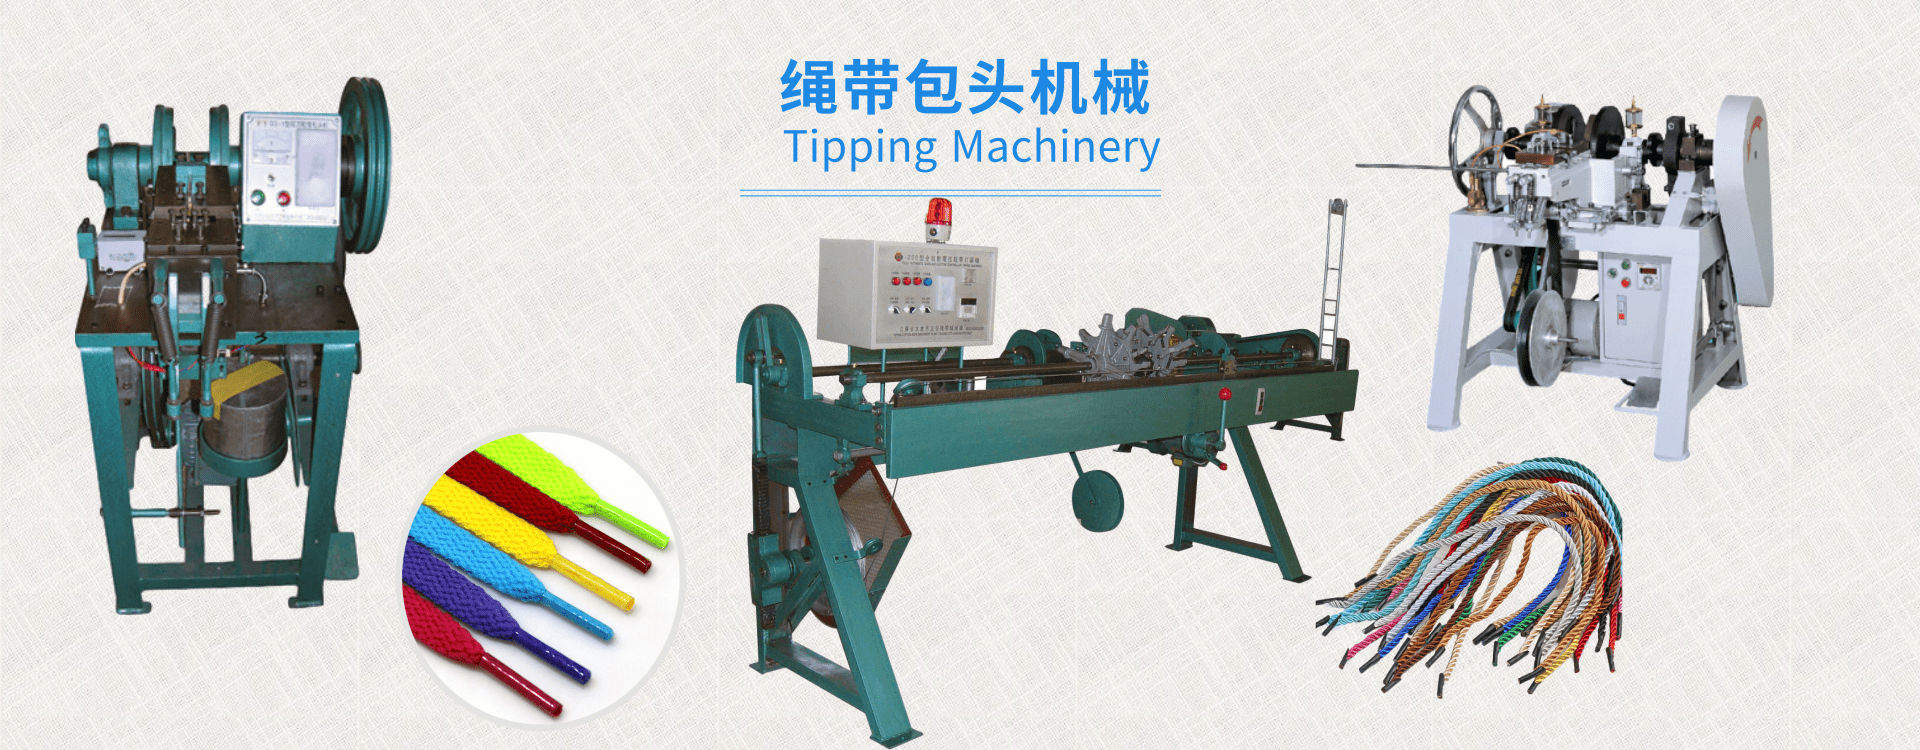 Tipping Machinery Banner@1920x750